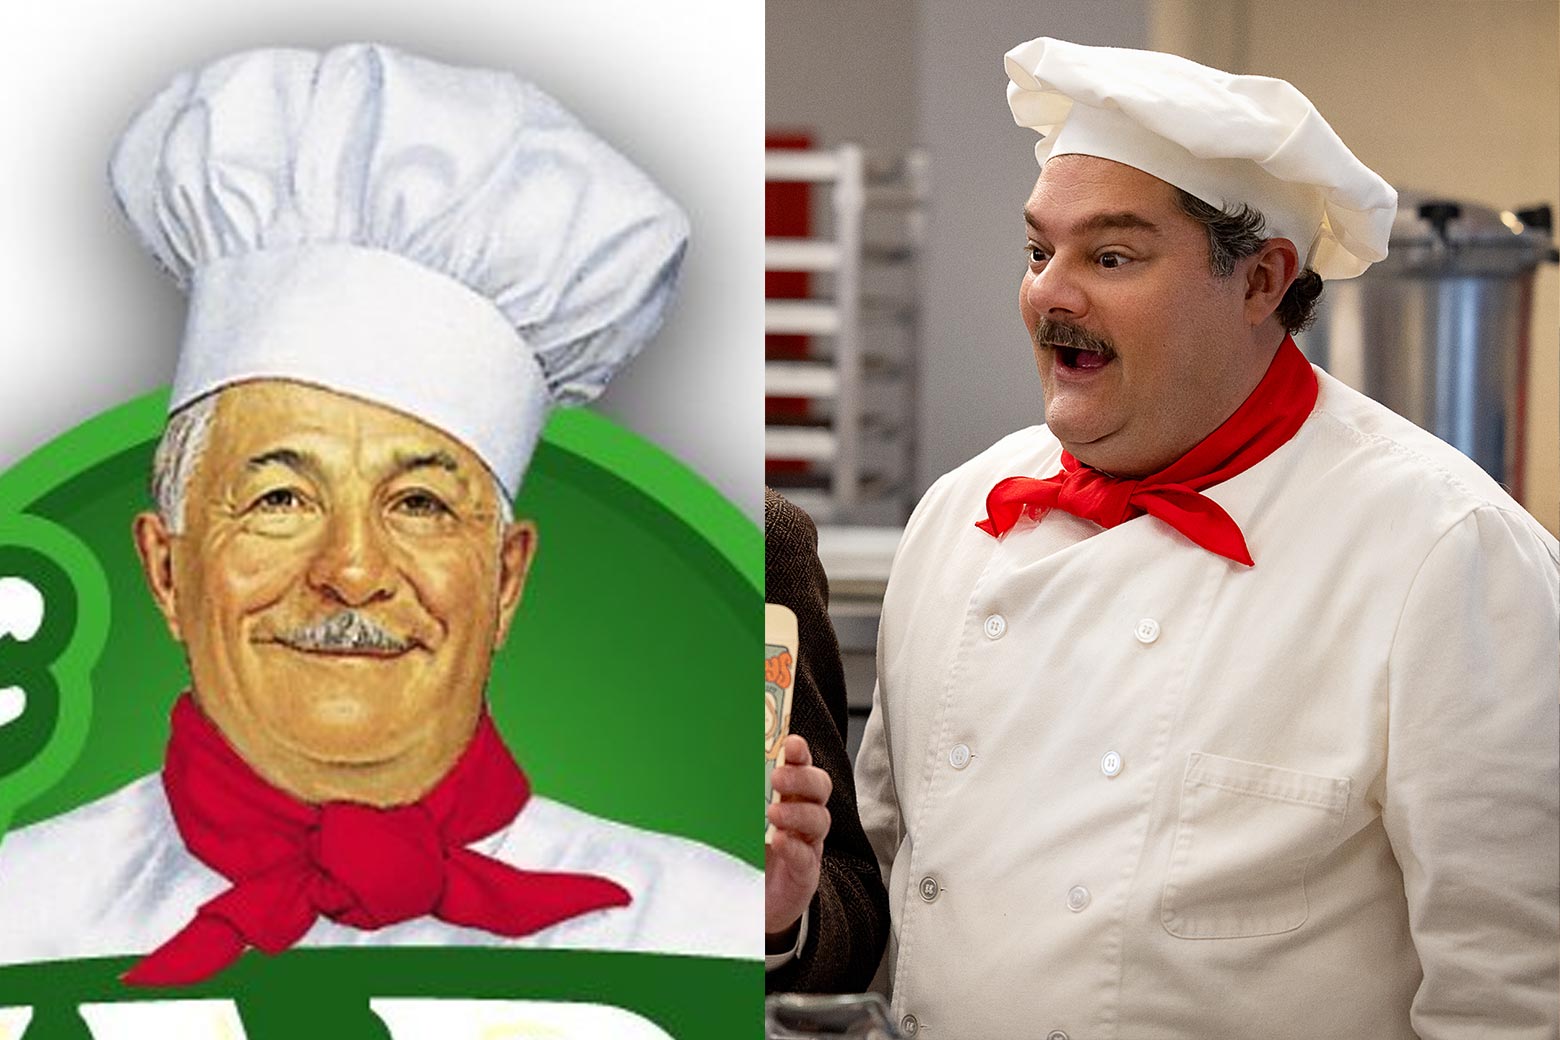 The Chef Boyardee logo on the left and a scene from the movie on the right.